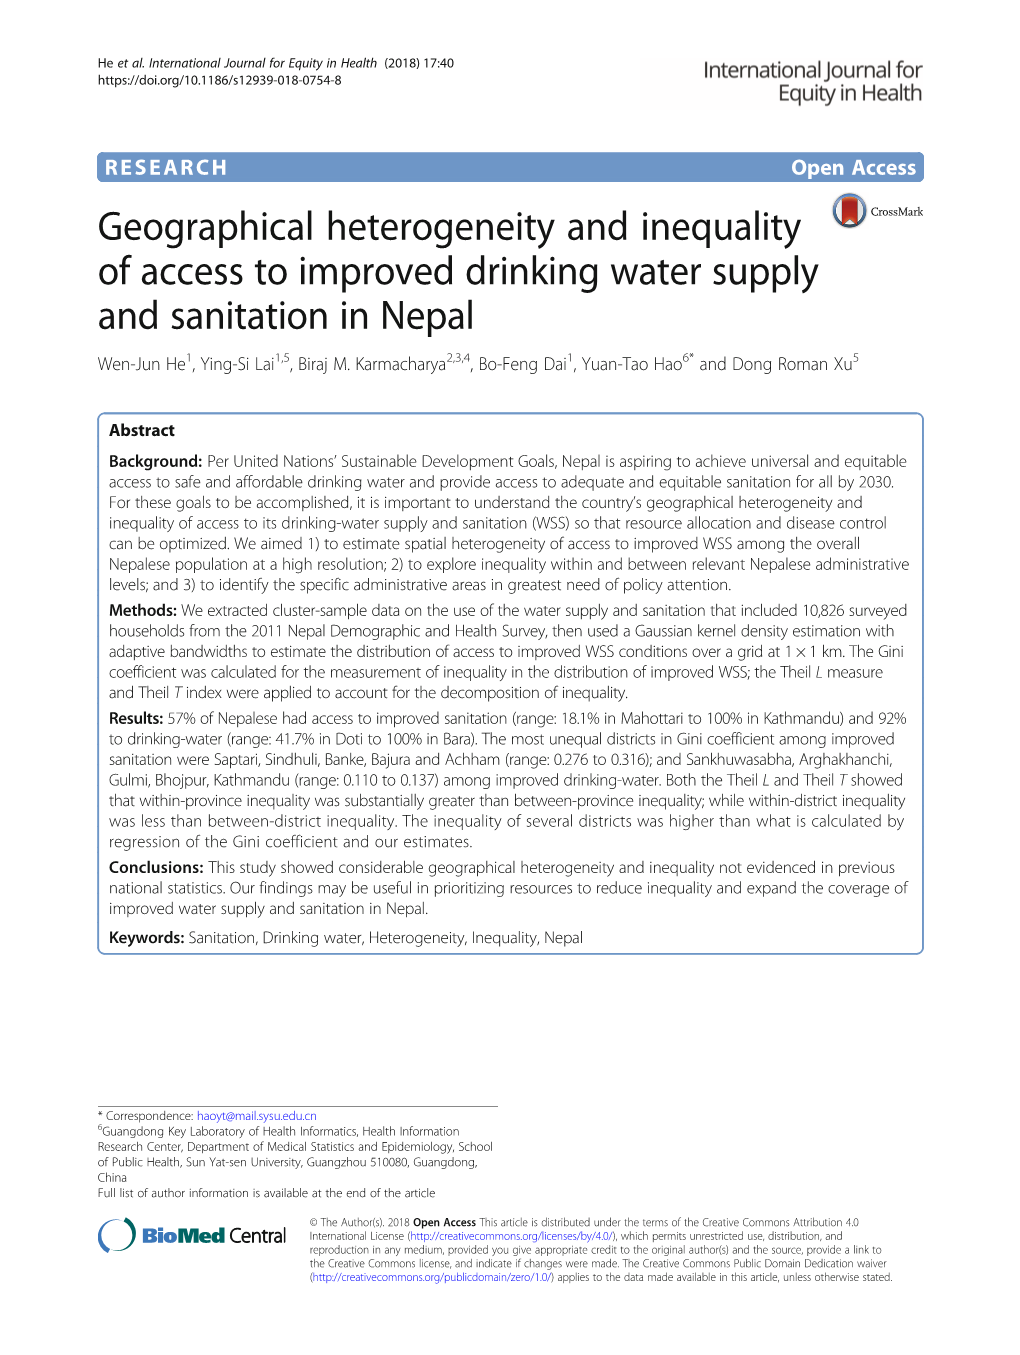 Geographical Heterogeneity and Inequality of Access to Improved Drinking Water Supply and Sanitation in Nepal Wen-Jun He1, Ying-Si Lai1,5, Biraj M